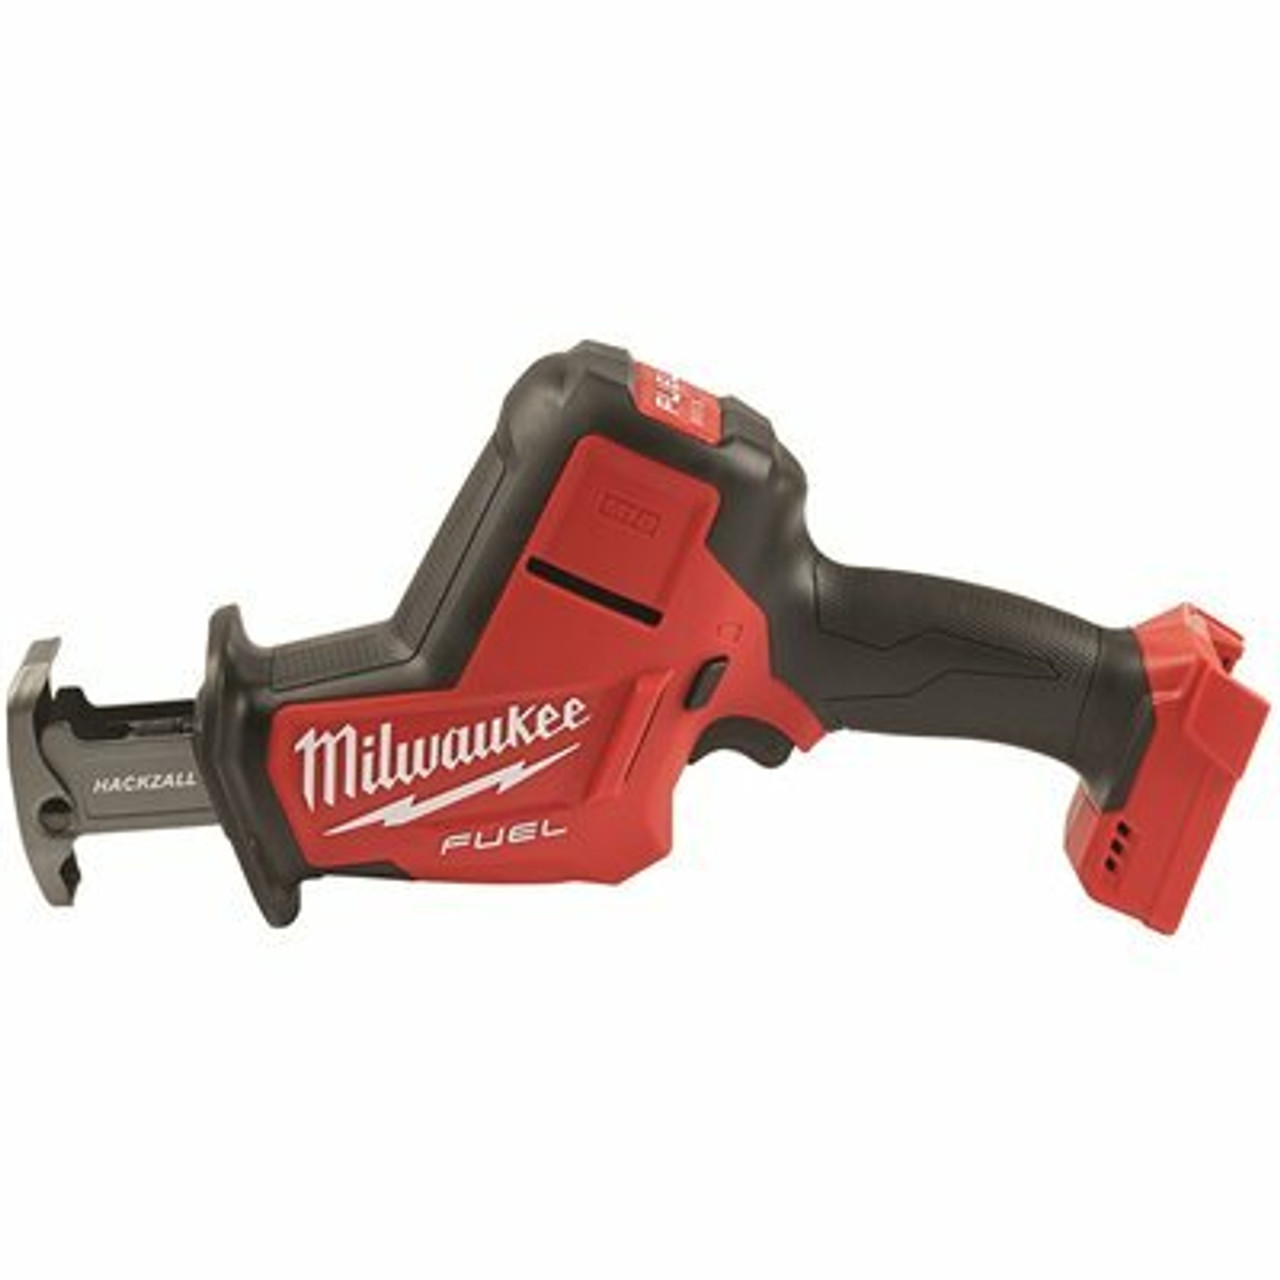 Milwaukee M18 Fuel 18-Volt Lithium-Ion Brushless Cordless Hackzall Reciprocating Saw (Tool-Only)